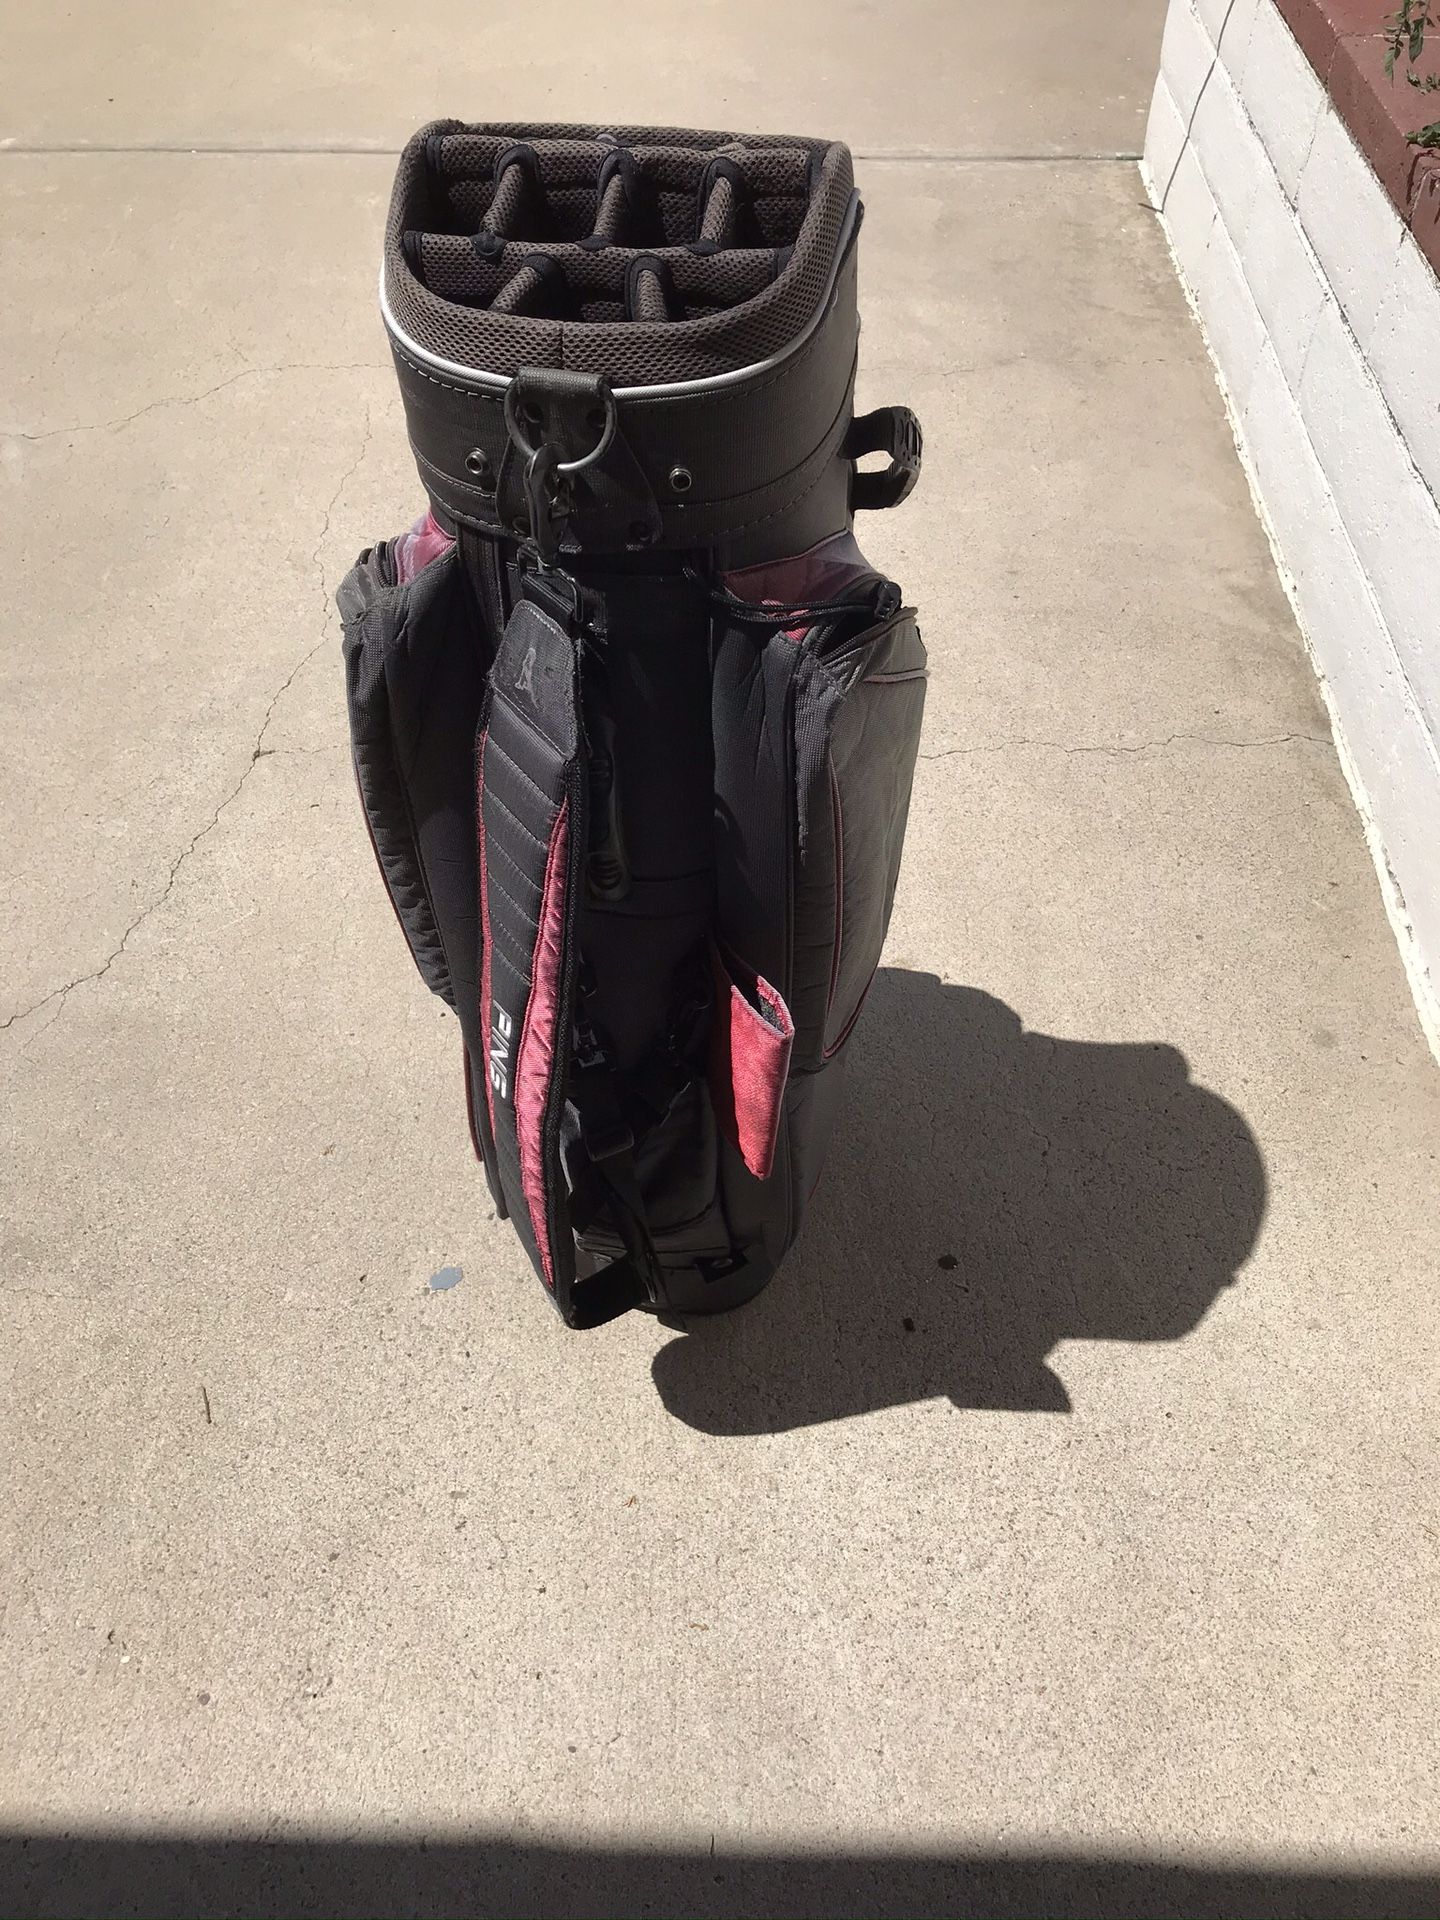 Ping discover brand hoofer carry bag, multi pockets in excellent condition!